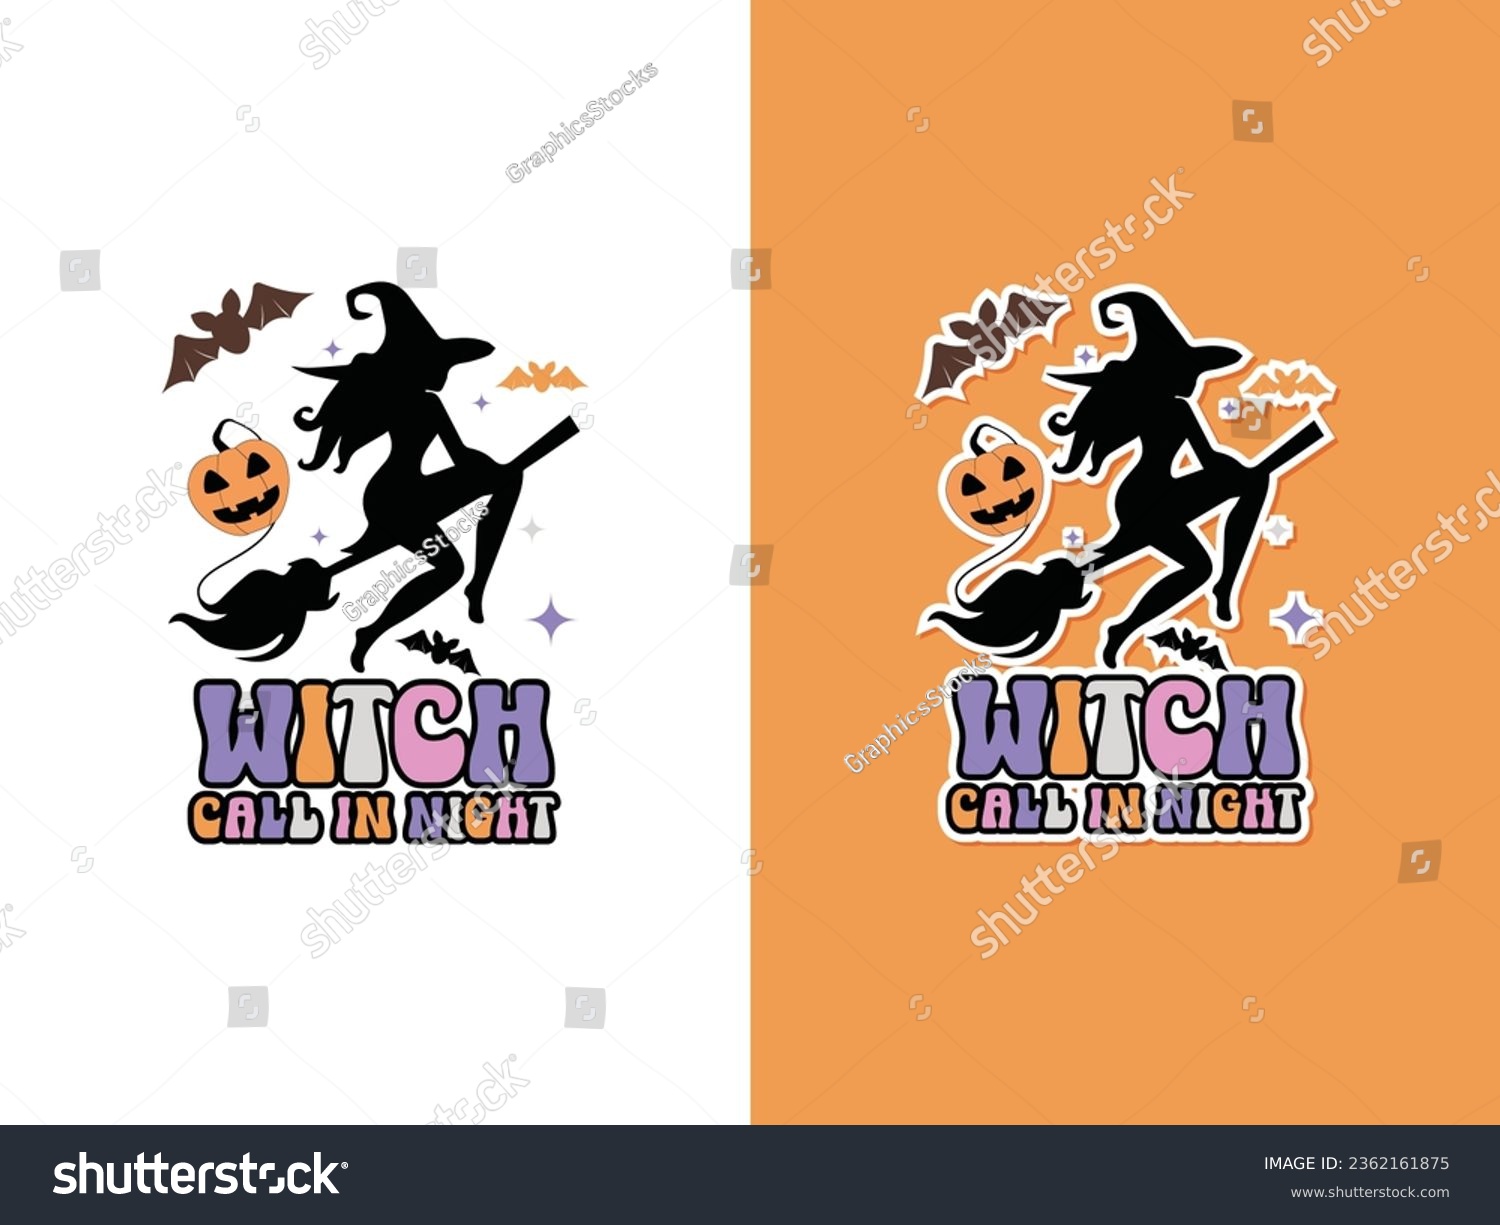 SVG of Witch call in night Halloween sublimation vector illustration svg